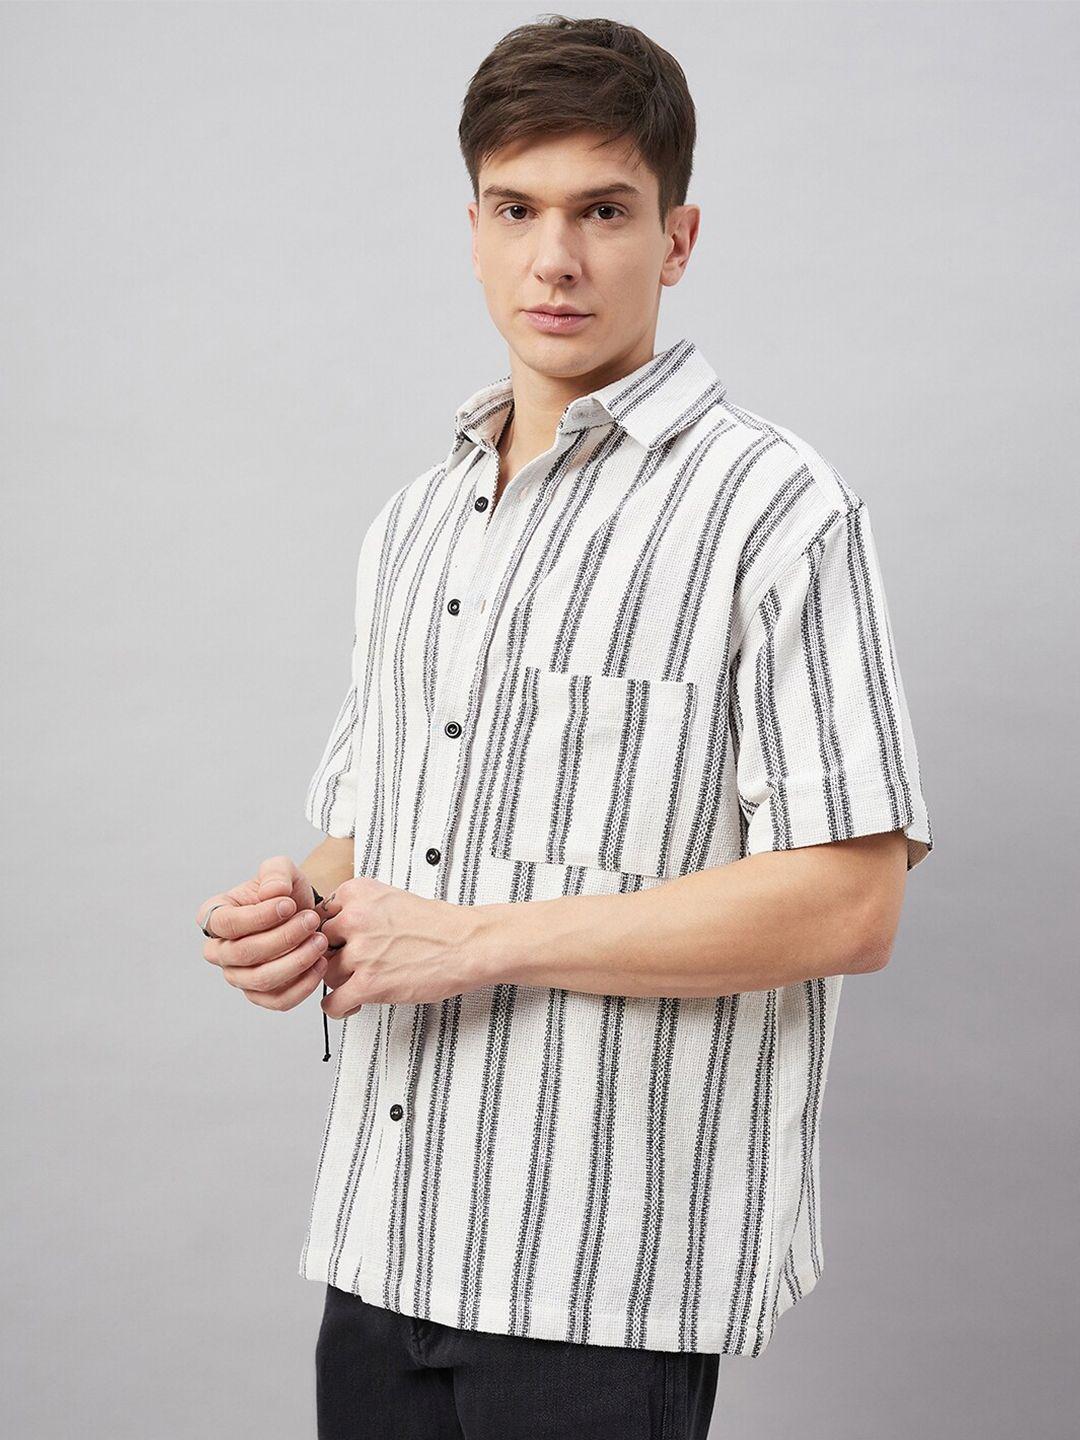 chimpaaanzee-oversized-vertical-striped-spread-collar-casual-shirt